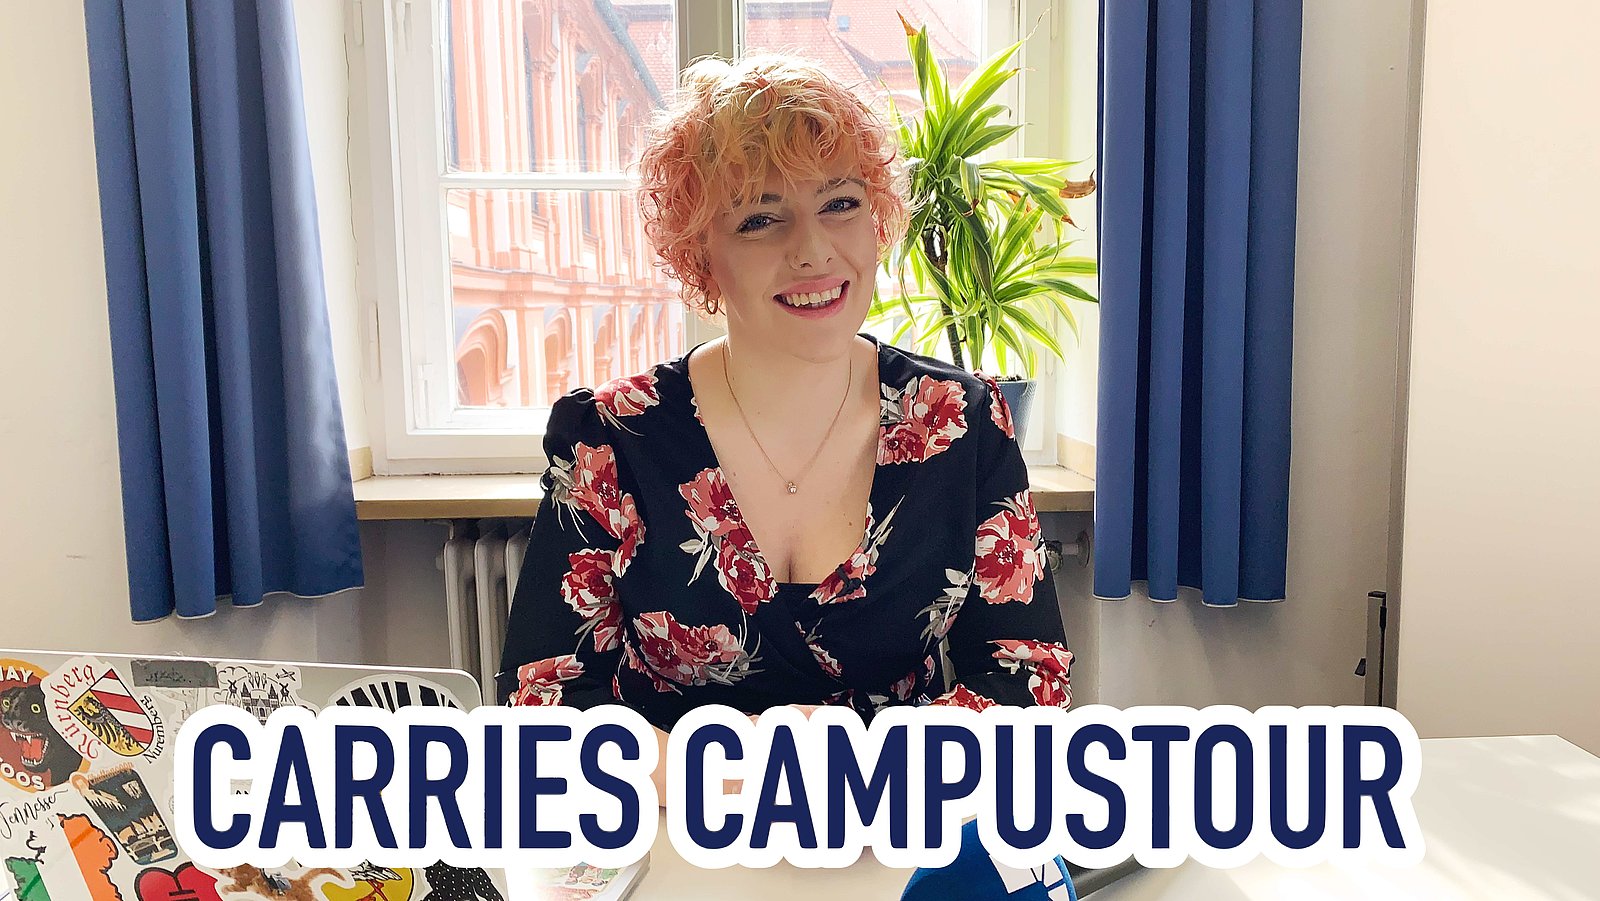 Carries Campustour (Video)